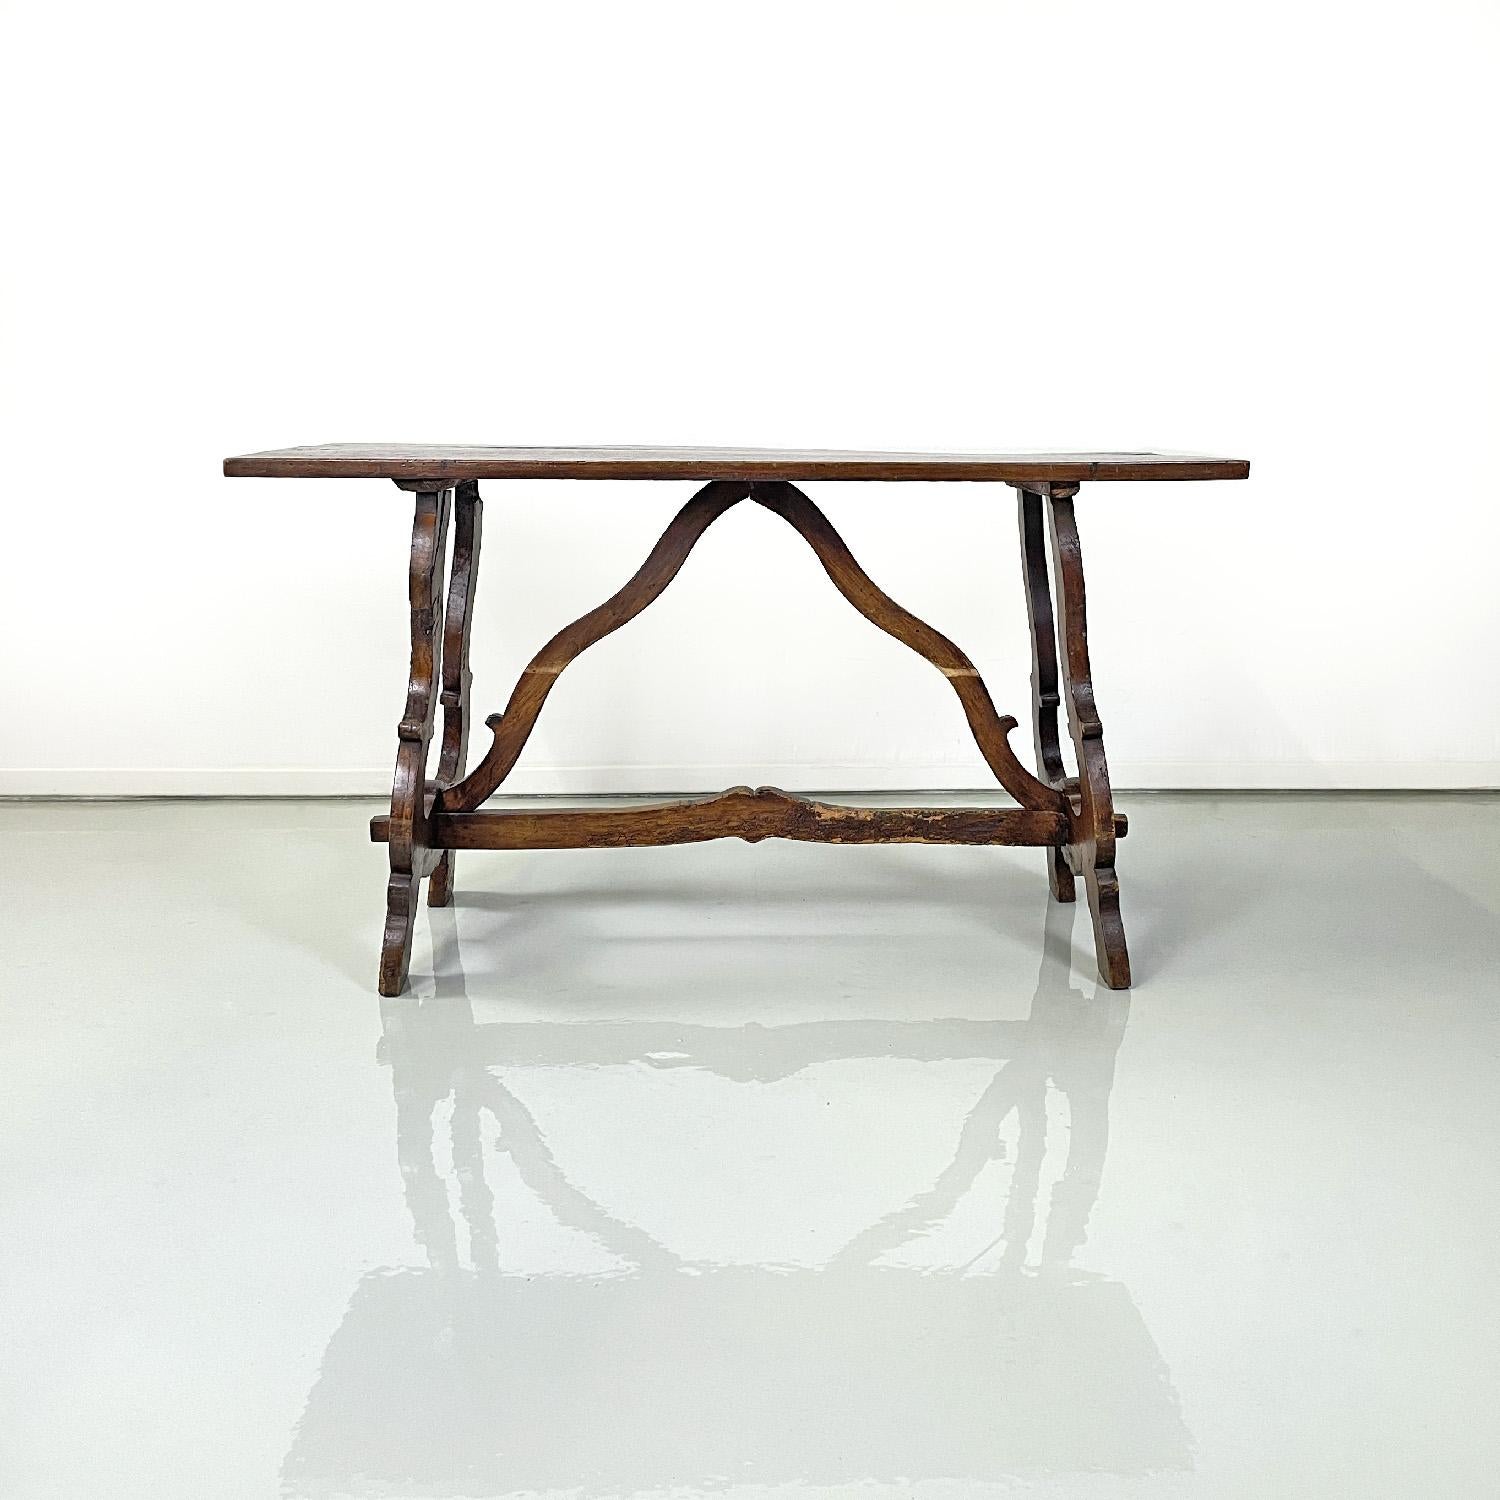 Italian antique wooden table with lyre legs, 1800s 
Entirely wooden dining table with rectangular top and lyre legs. In the center of the legs there is a decorated beam that structures the base of the table together with two other shaped components